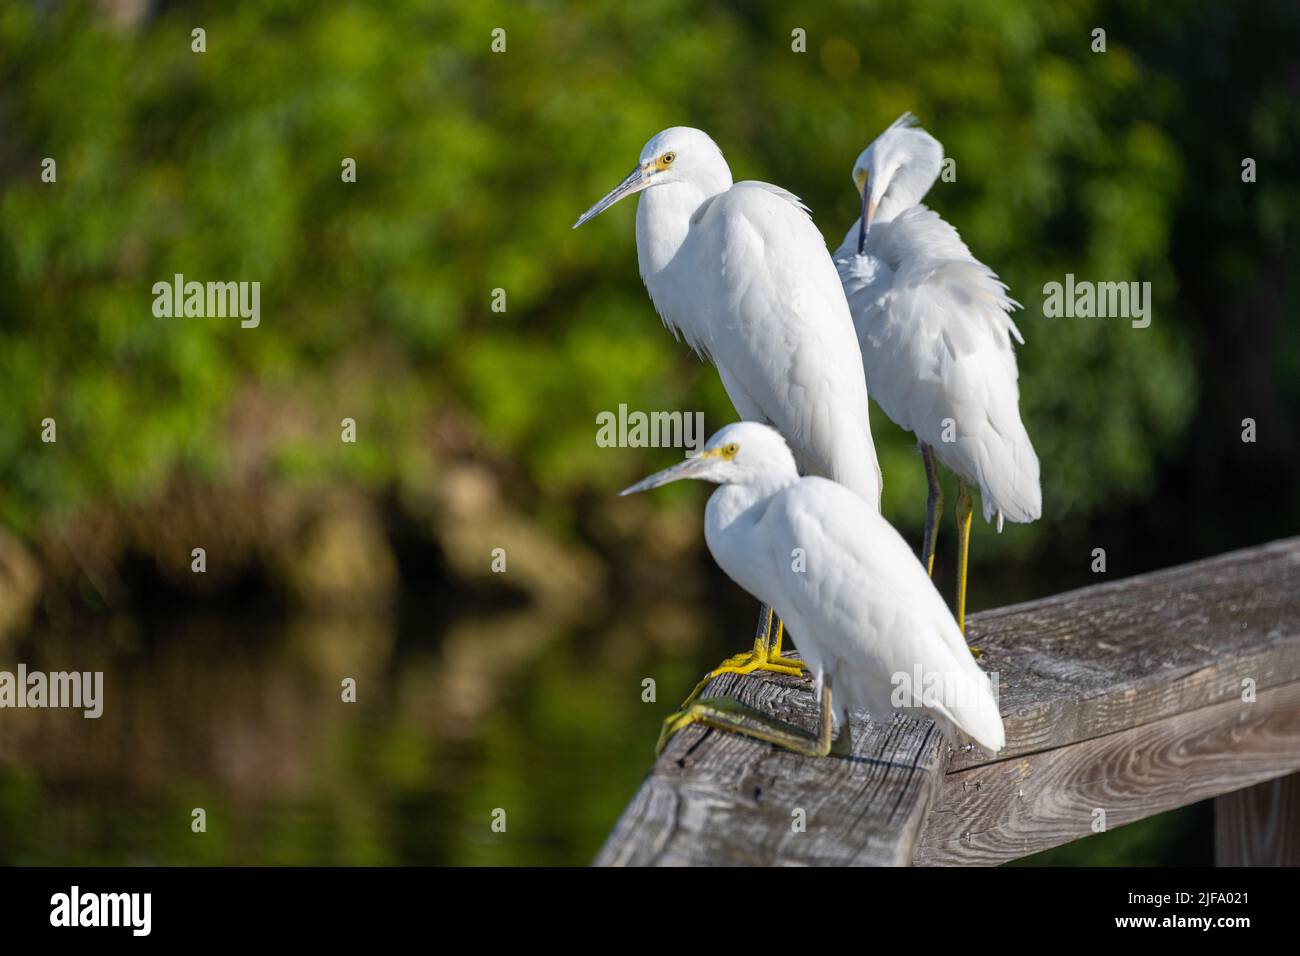 Snowy Egrets perched on a boardwalk.  Snowy Egrets were hunted nearly to extinction for their wispy feathers. Stock Photo